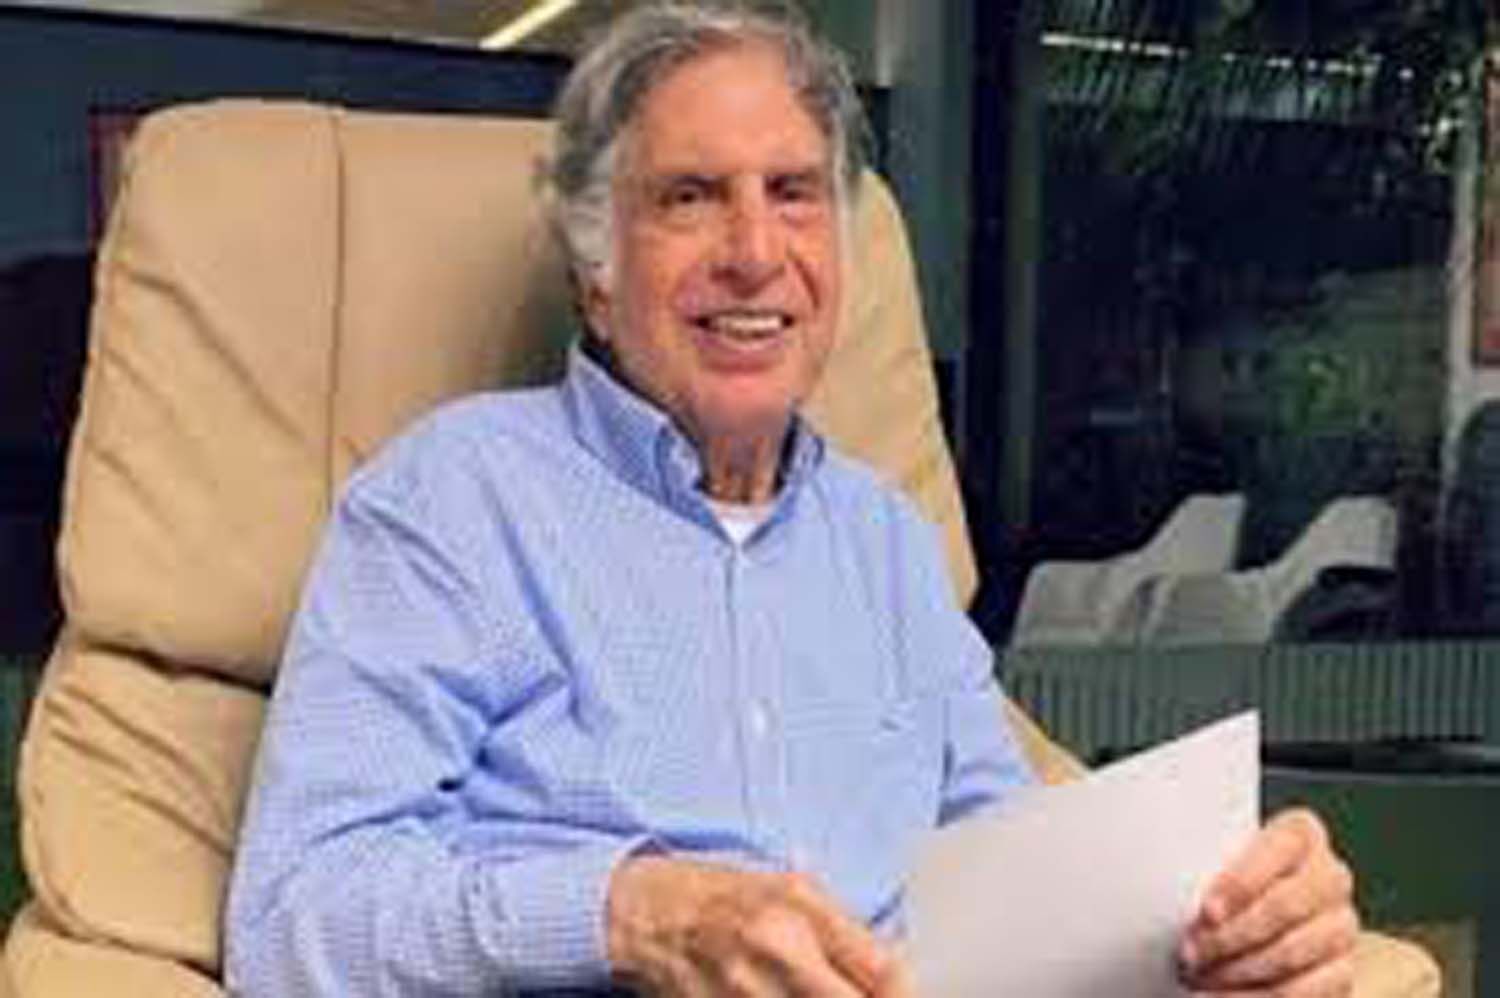 About PM CARES Fund: Know what is ‘PM Care Fund’, the responsibility of which PM Modi gave to Ratan Tata